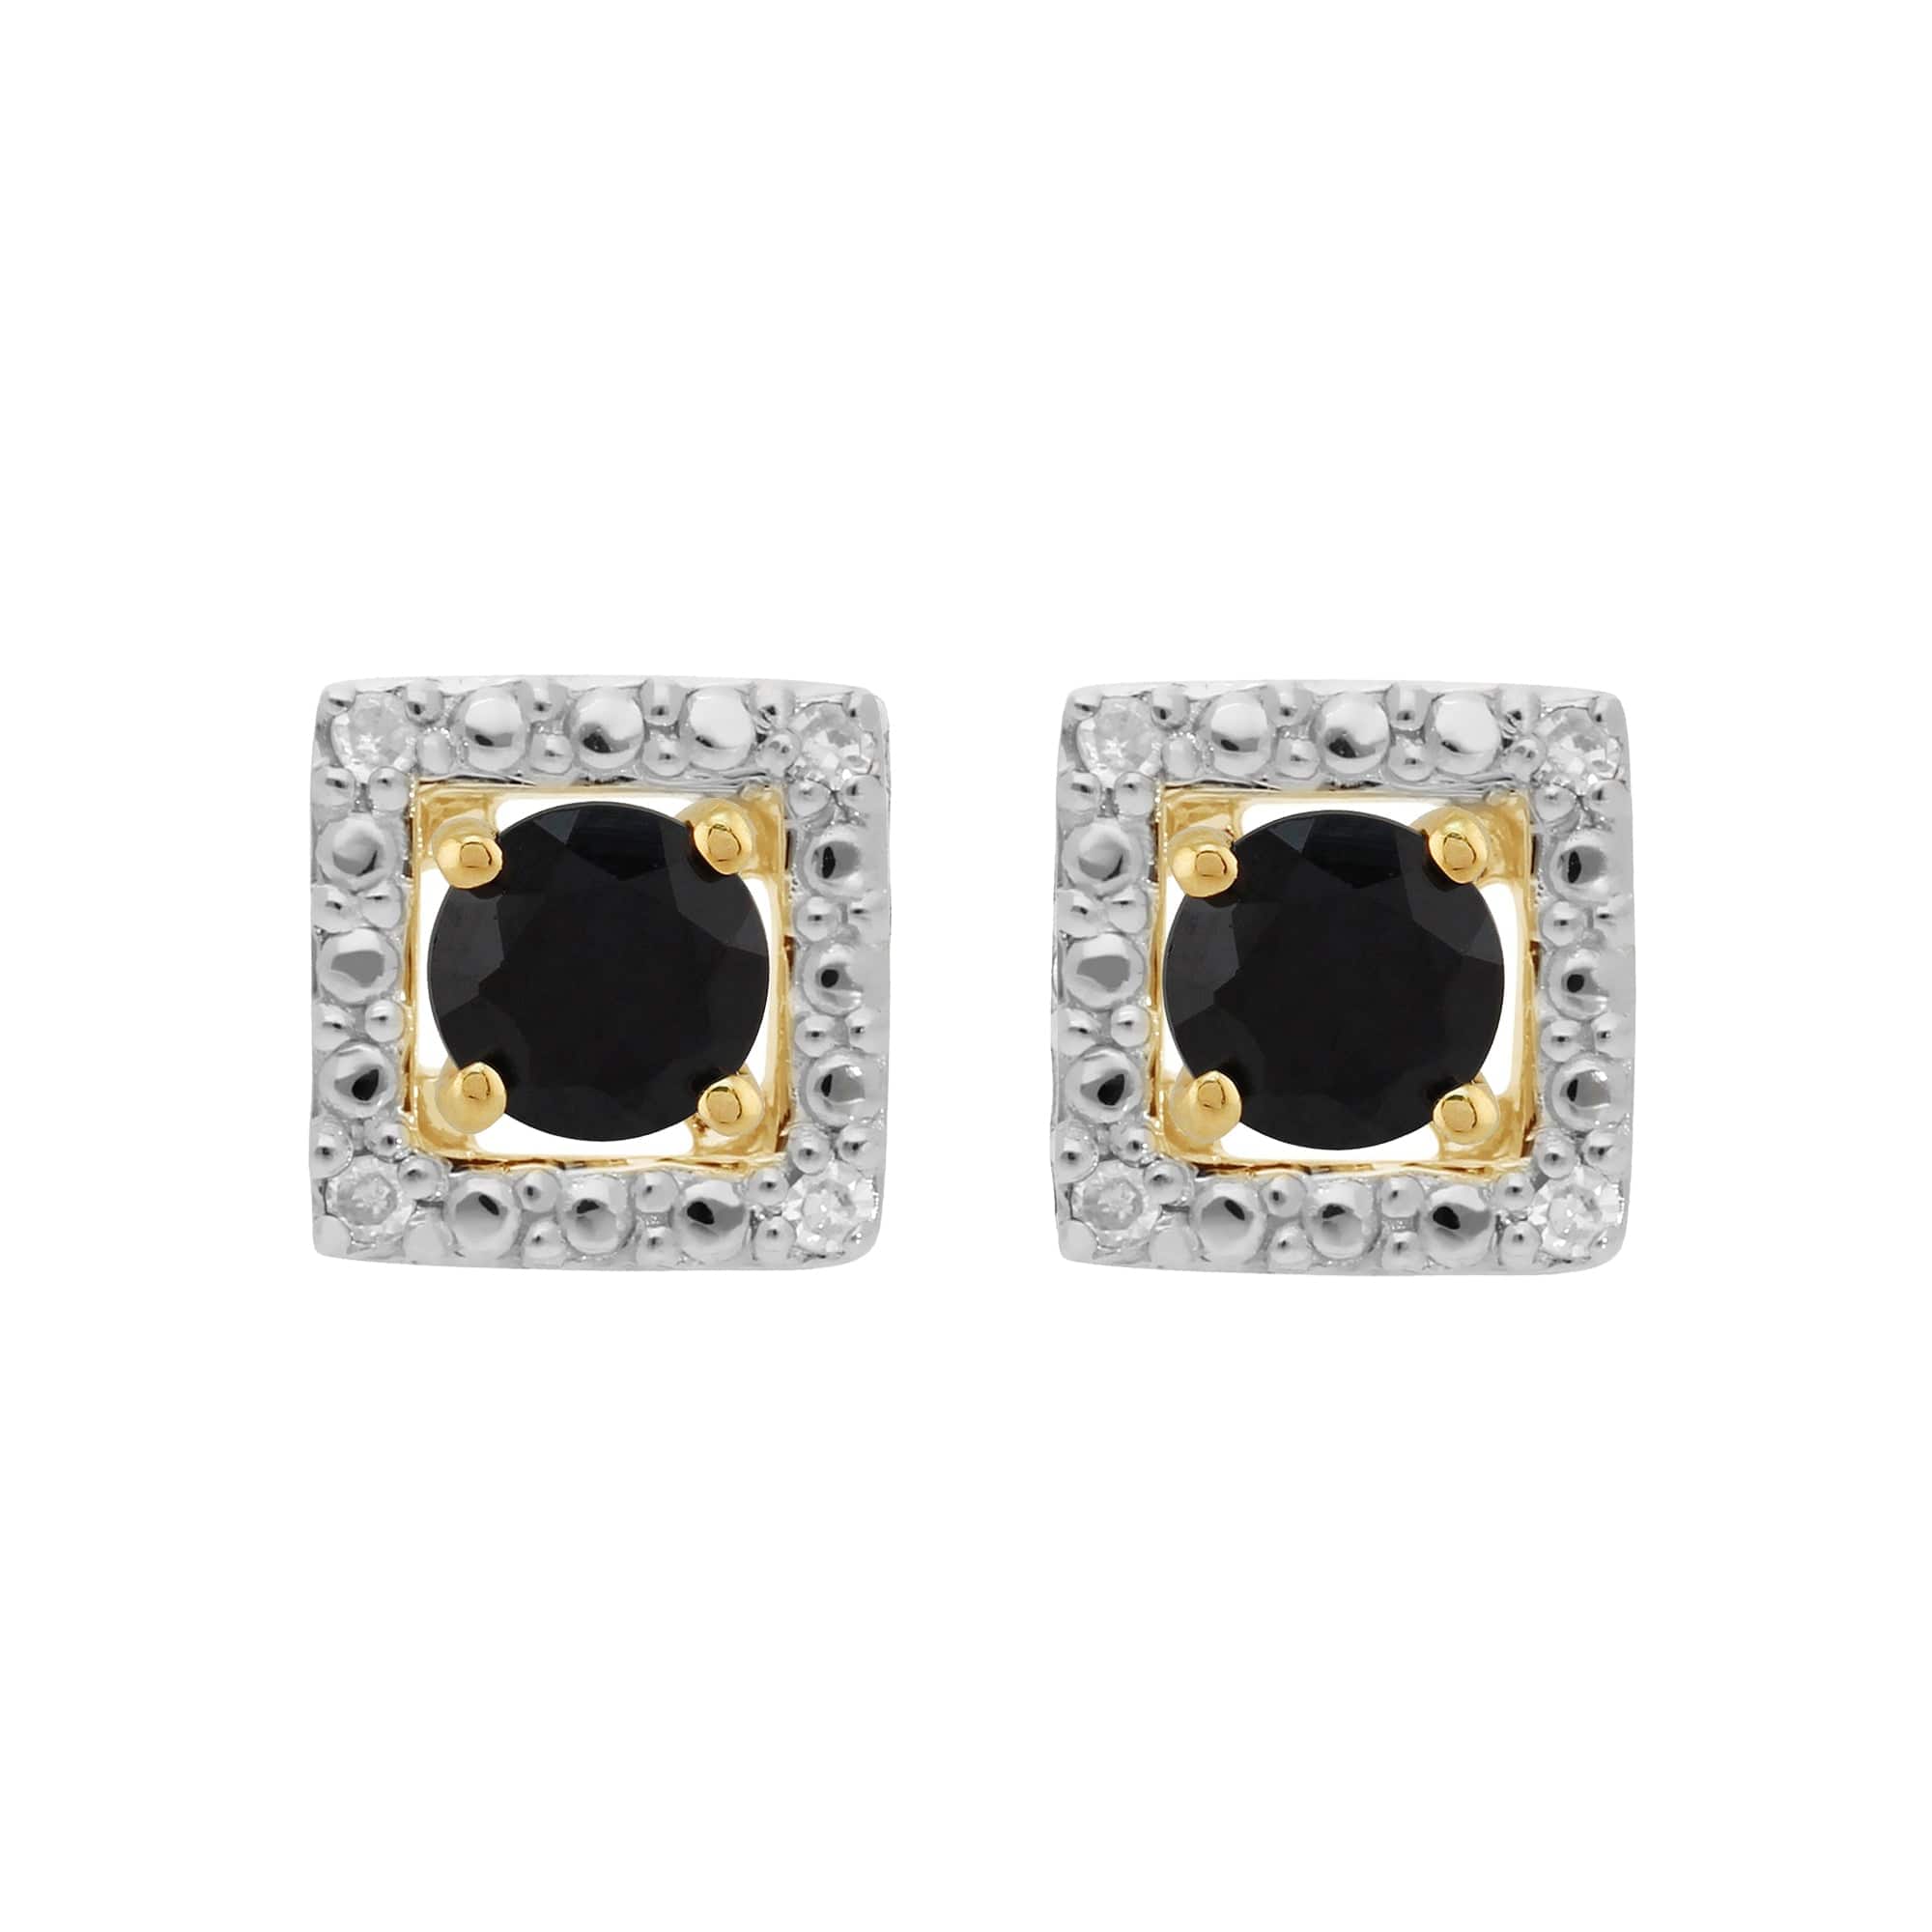 11559-191E0379019 Classic Round Dark Blue Sapphire Stud Earrings with Detachable Diamond Square Earrings Jacket Set in 9ct Yellow Gold 1